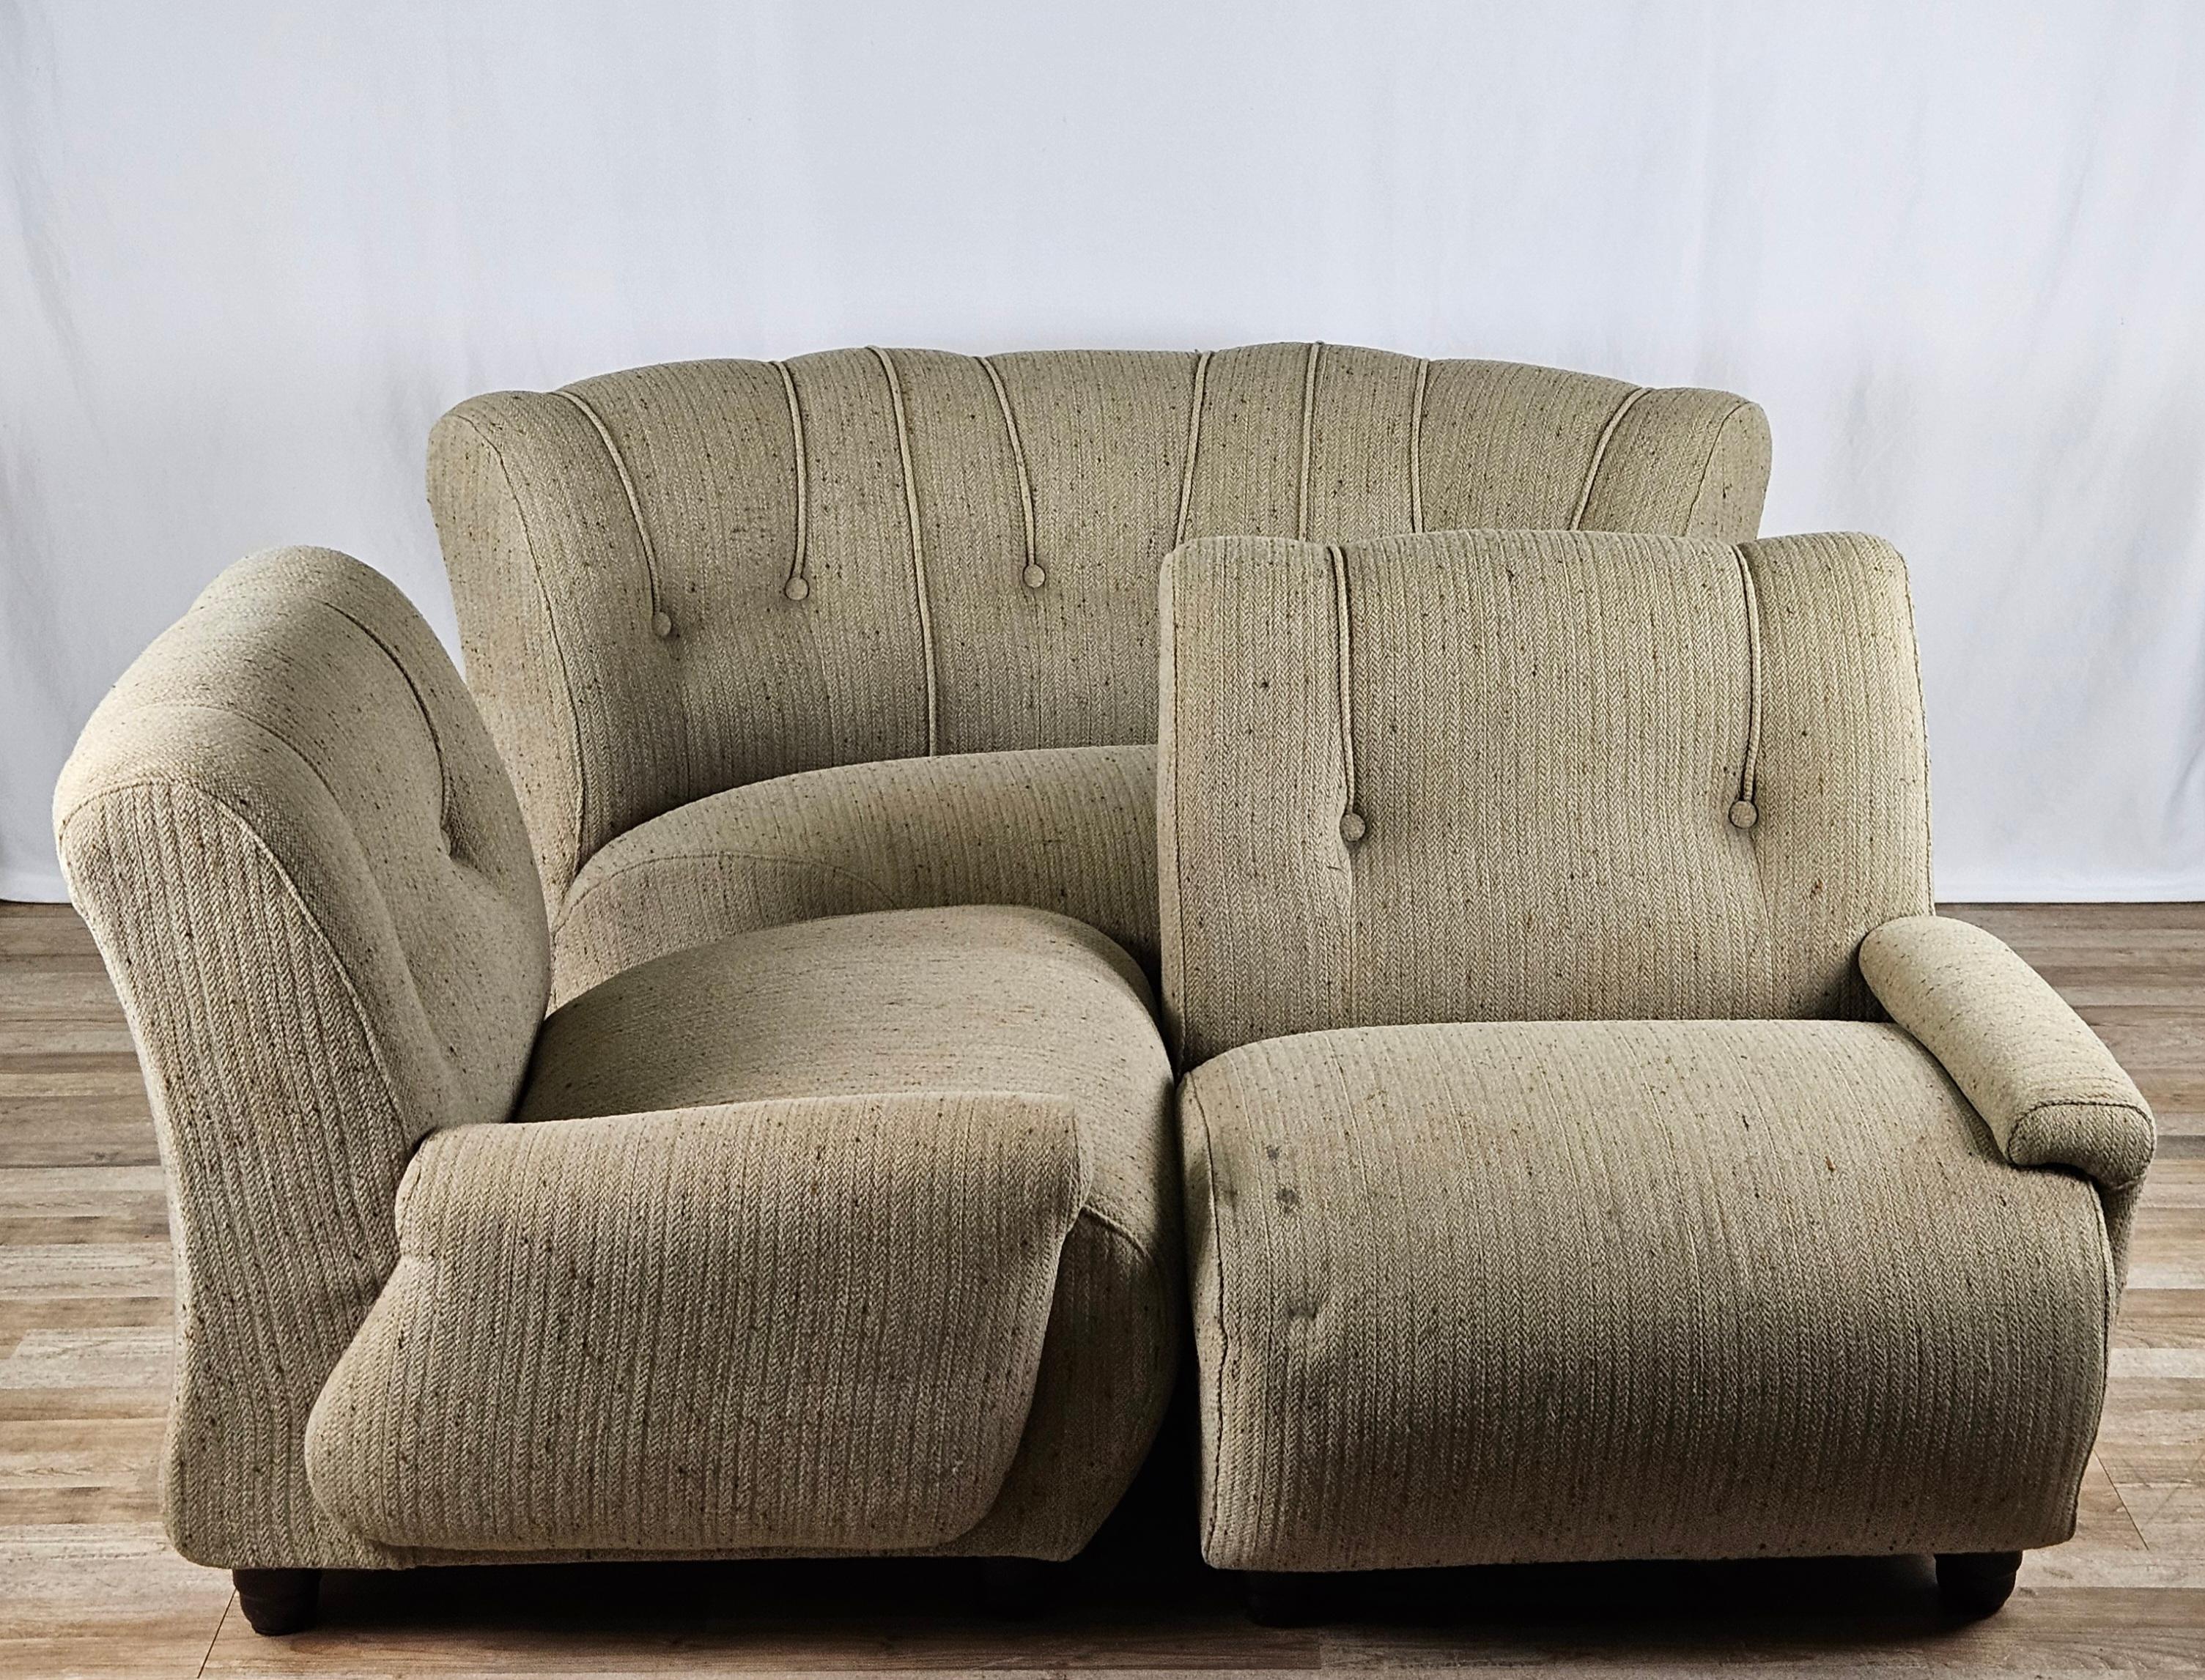 Mid-century modular sofa consisting of four comfortable gray fabric seats with wooden feet.

It can be used in different compositions, with the corner seat and the two side seats or with just the three standard seats.

It shows normal signs of wear